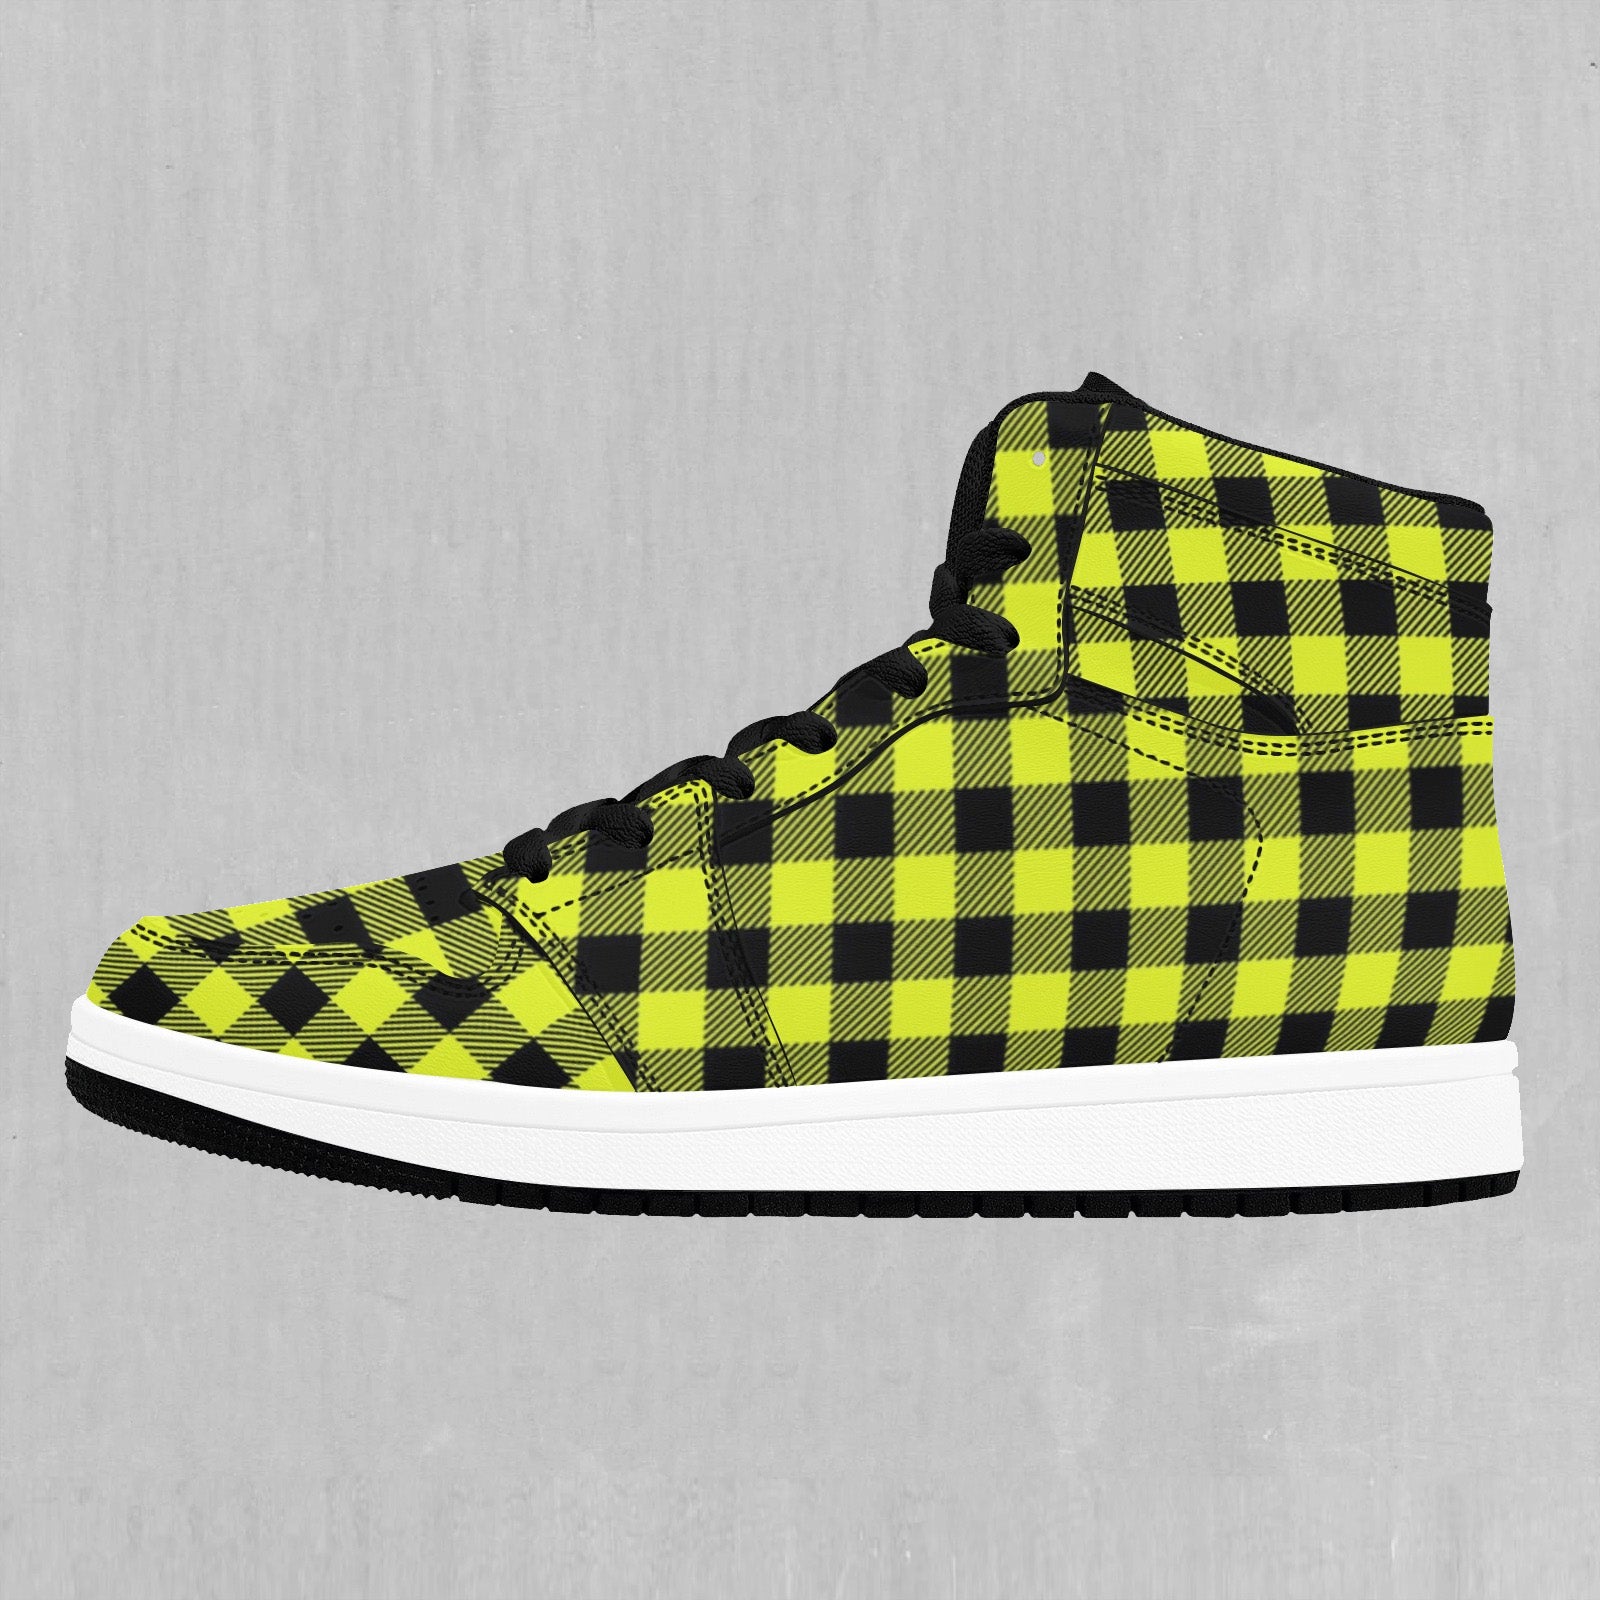 Yellow Checkered Plaid High Top Sneakers